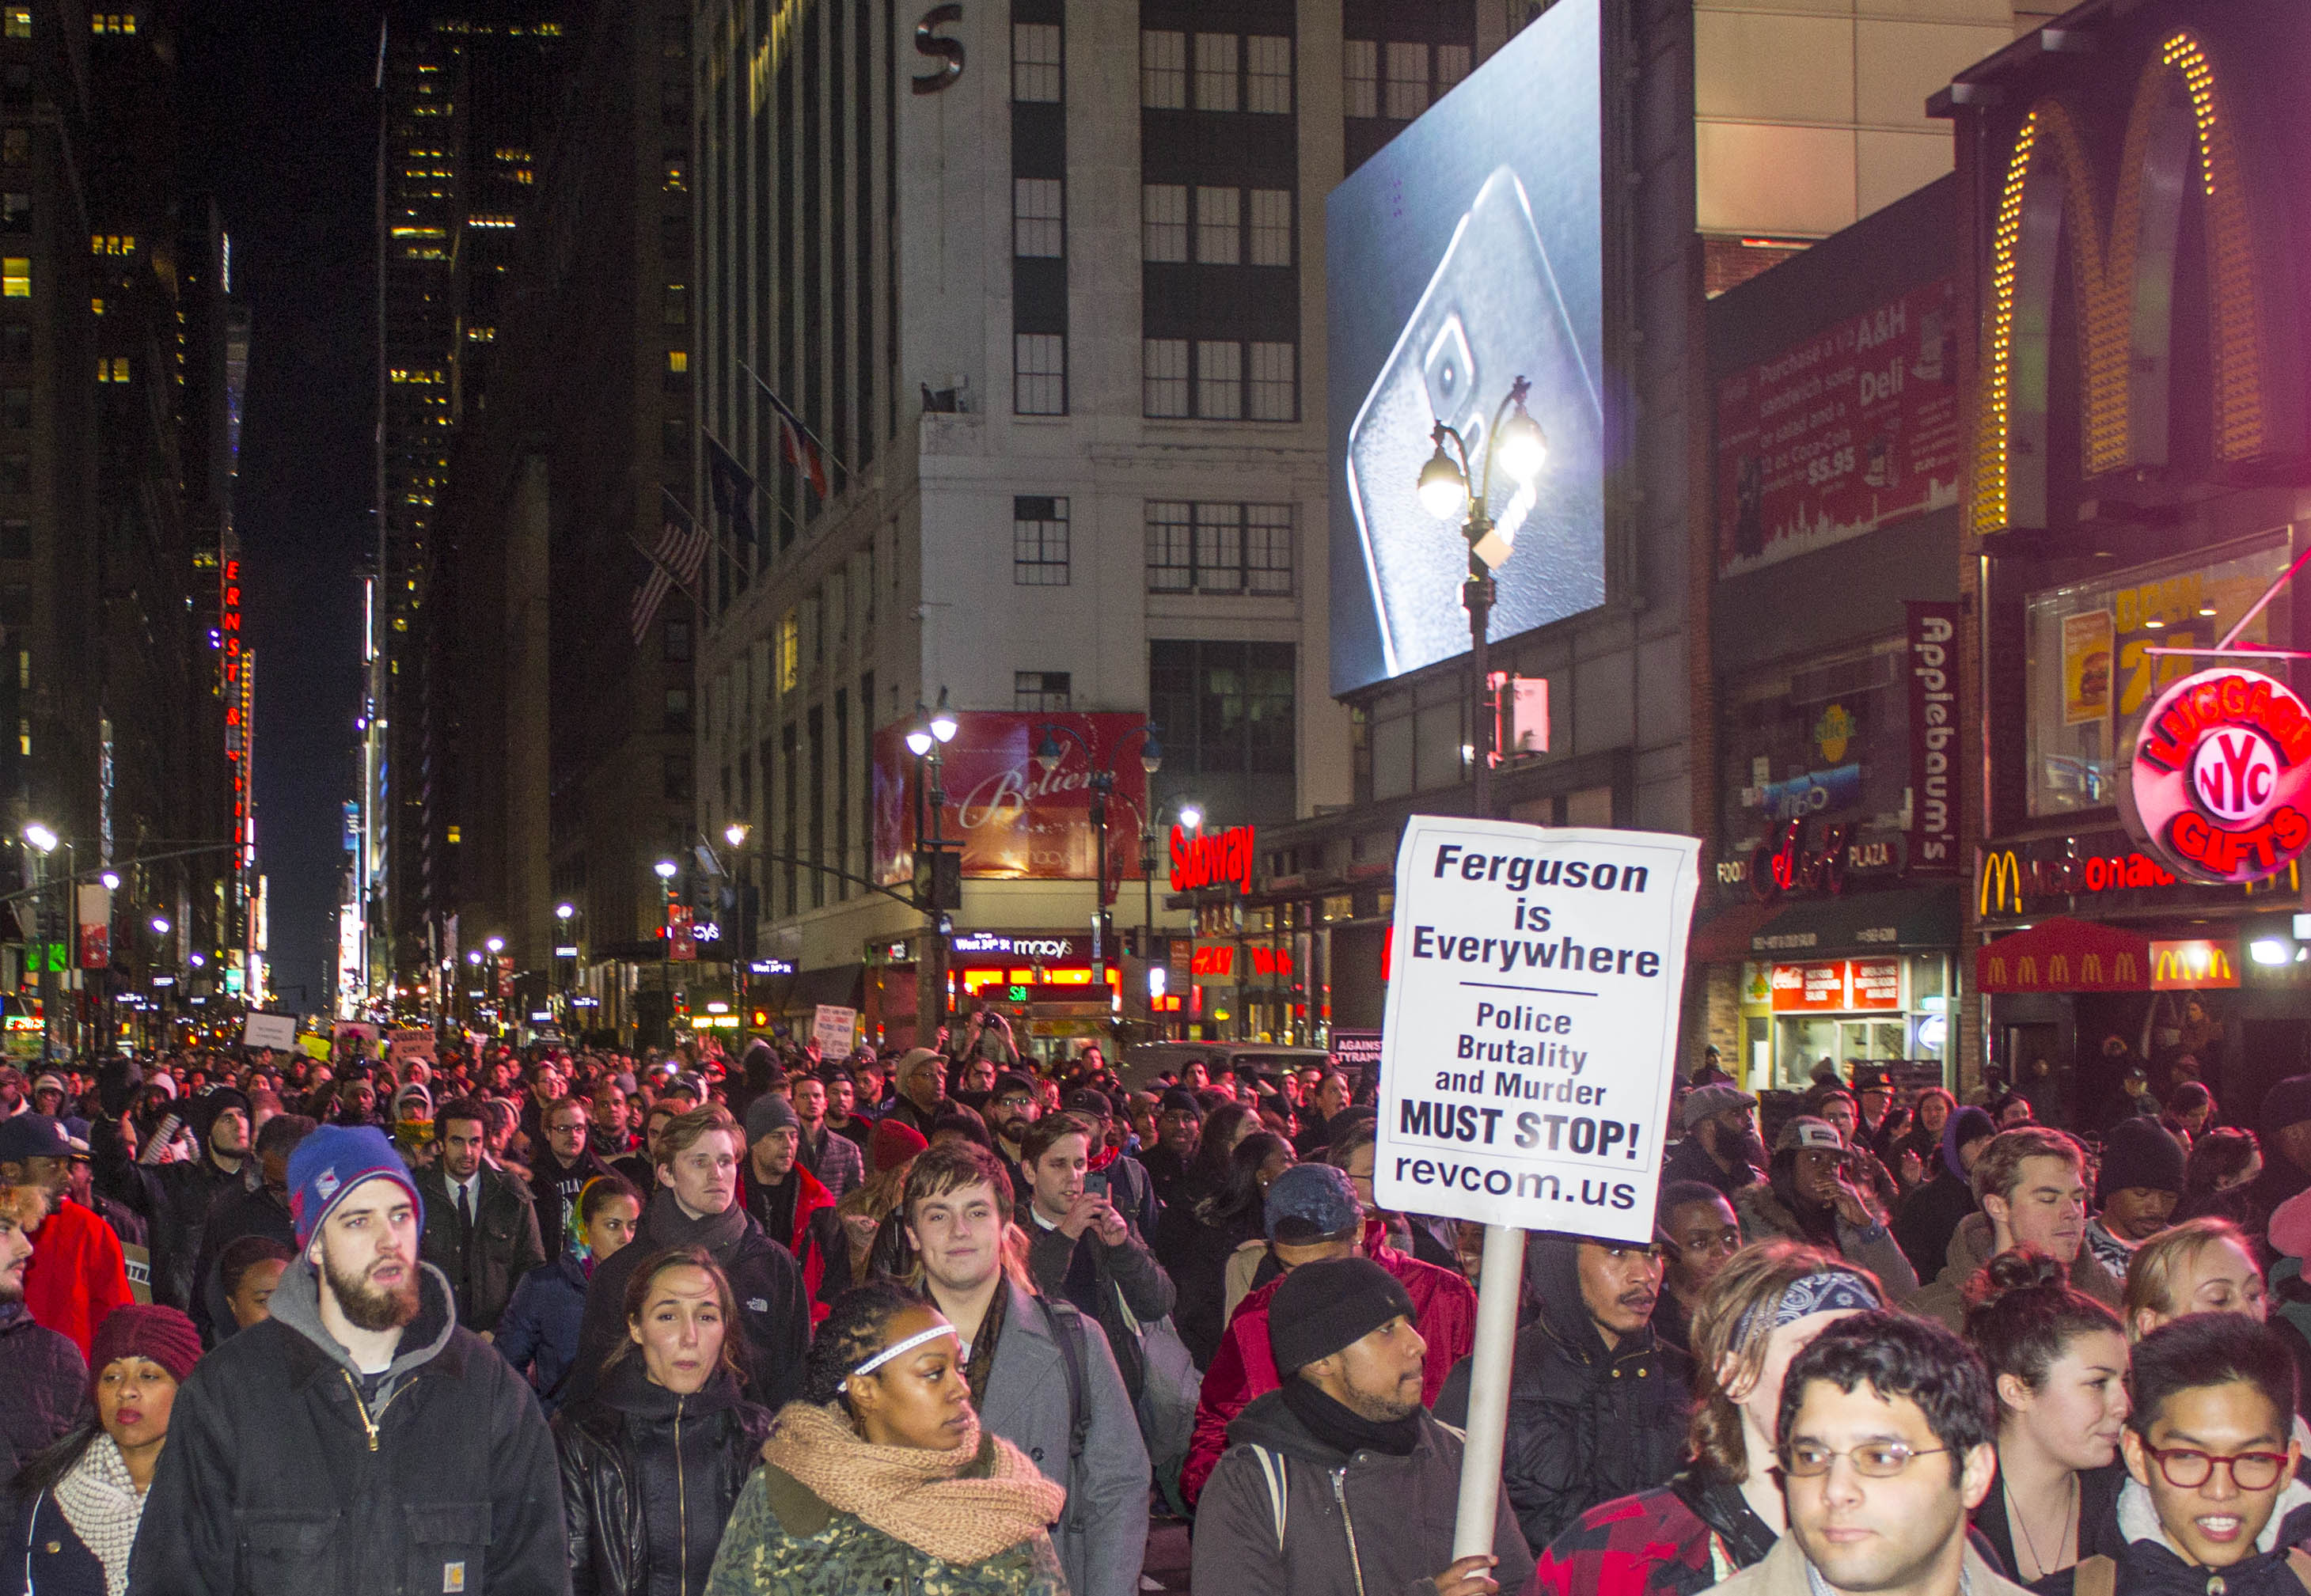 After marching on the West Side Highway as far north as W. 72nd St., hundreds of demonstrators turned south and arrived at Times Square at about 10:30 p.m.